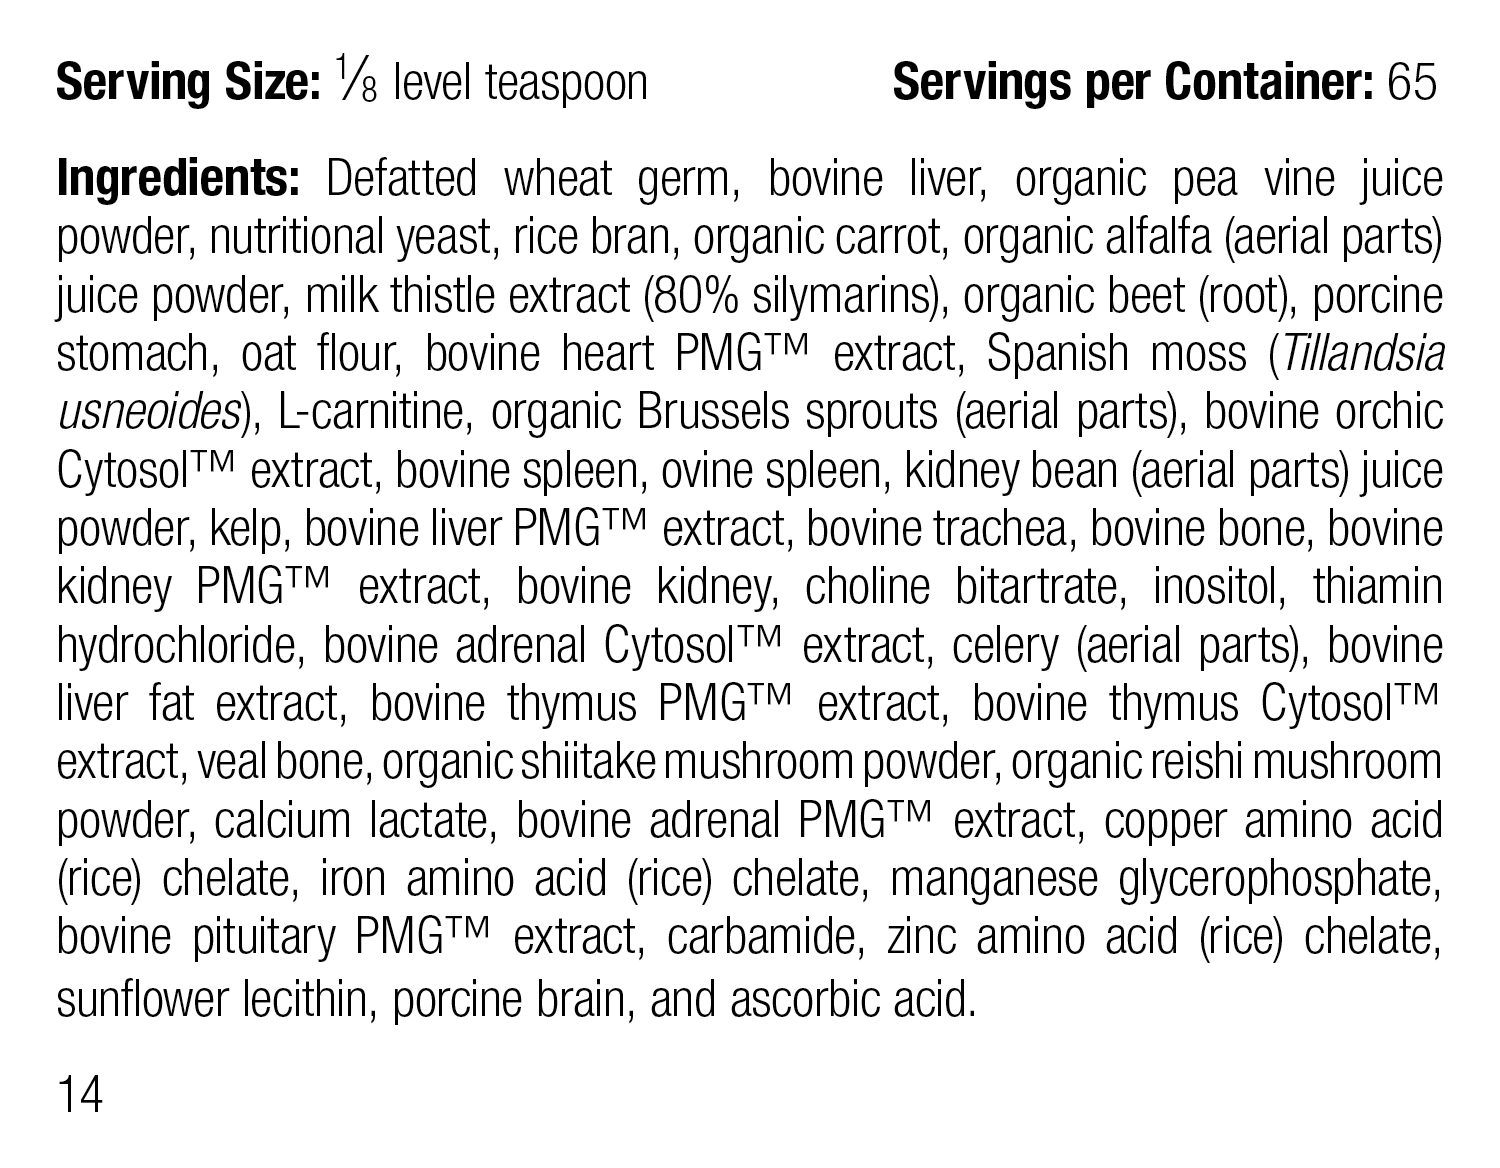 Canine Whole Body Support, 25 g, Rev 14 Supplement Facts